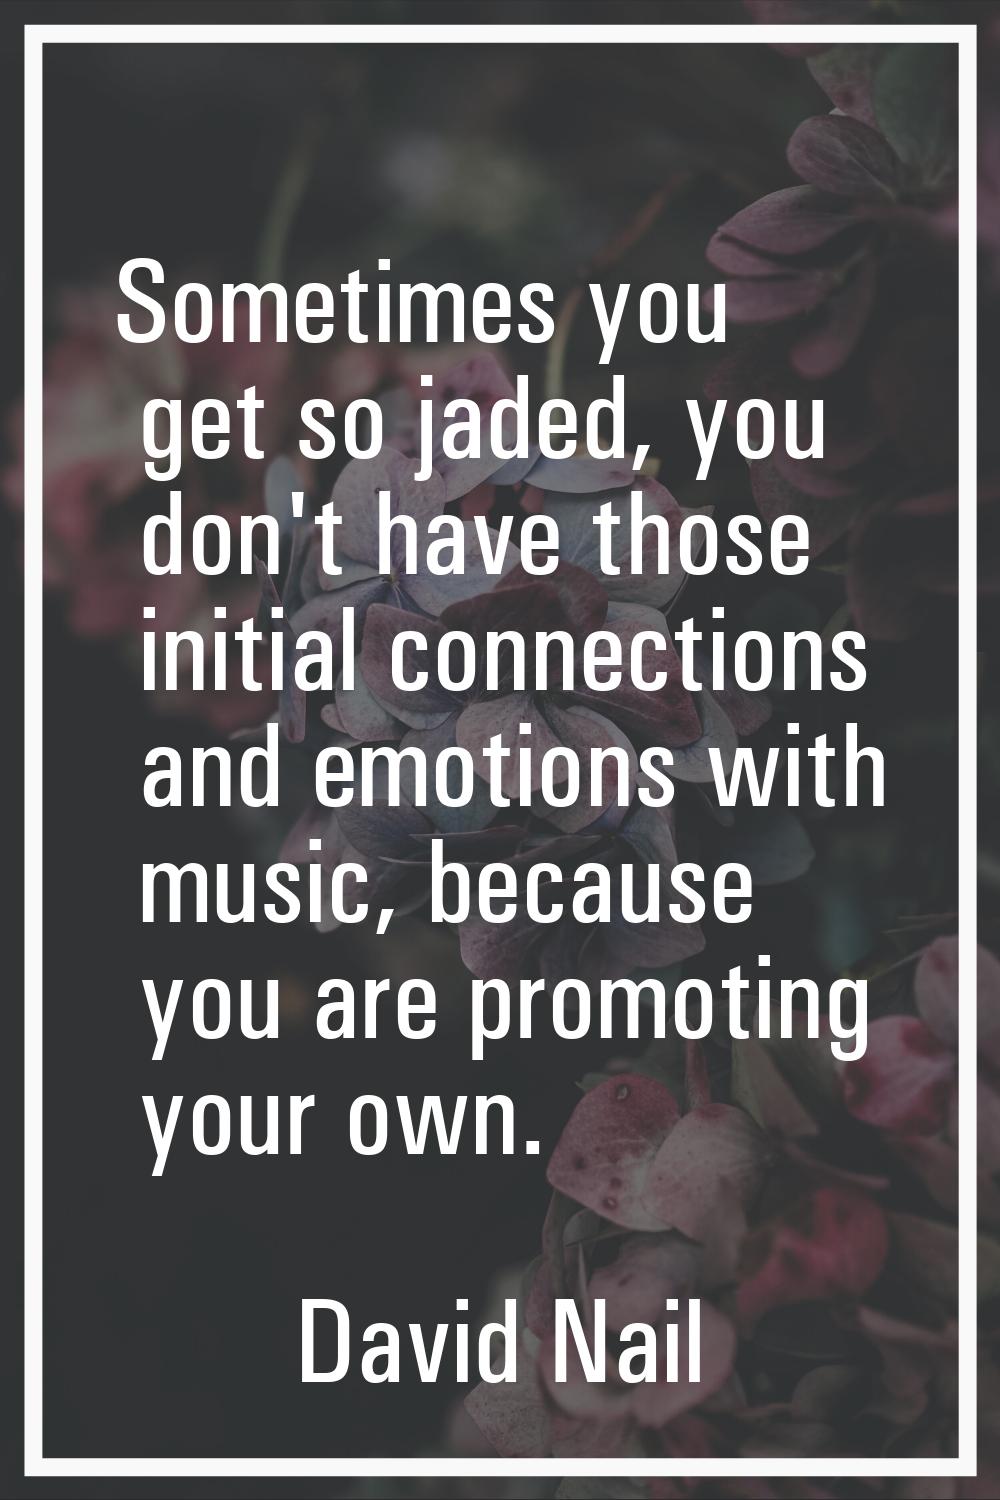 Sometimes you get so jaded, you don't have those initial connections and emotions with music, becau